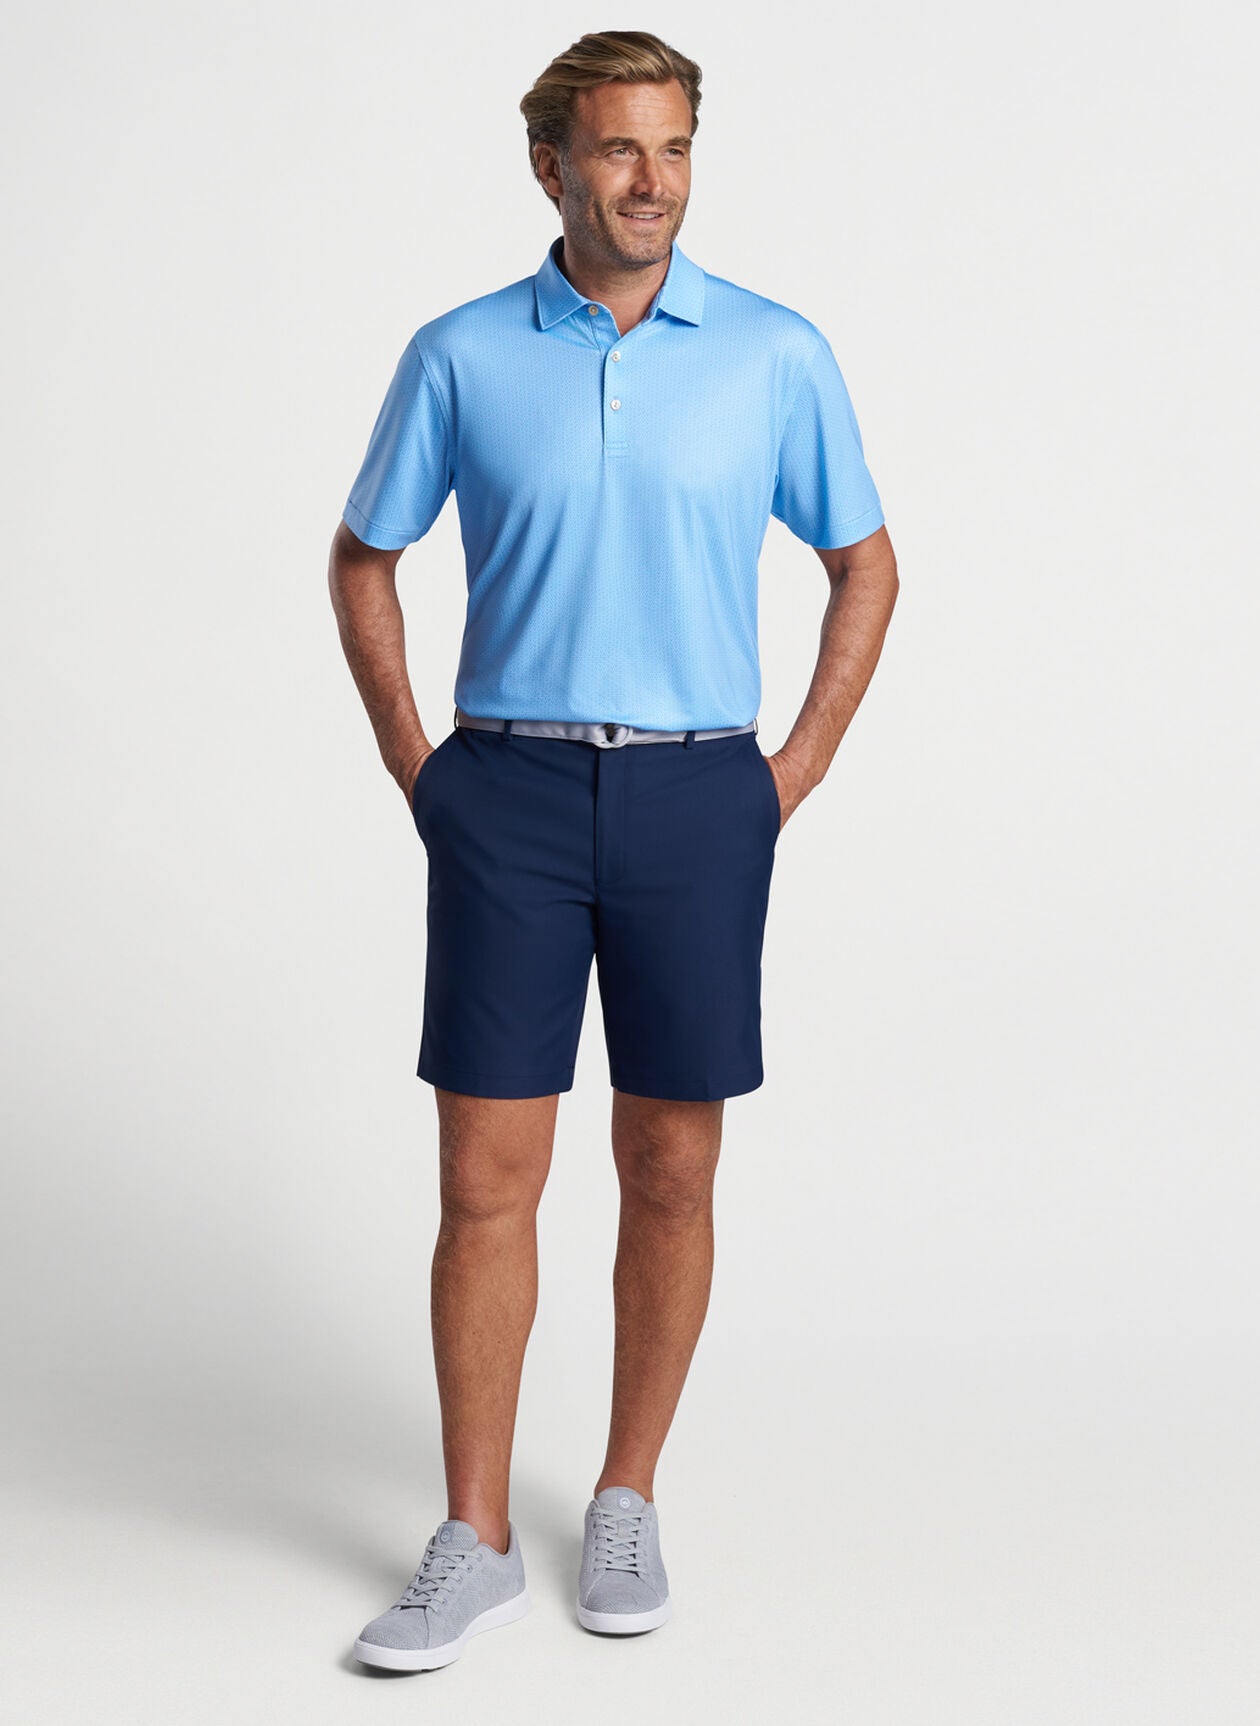 I'll Have It Neat Performance Jersey Polo